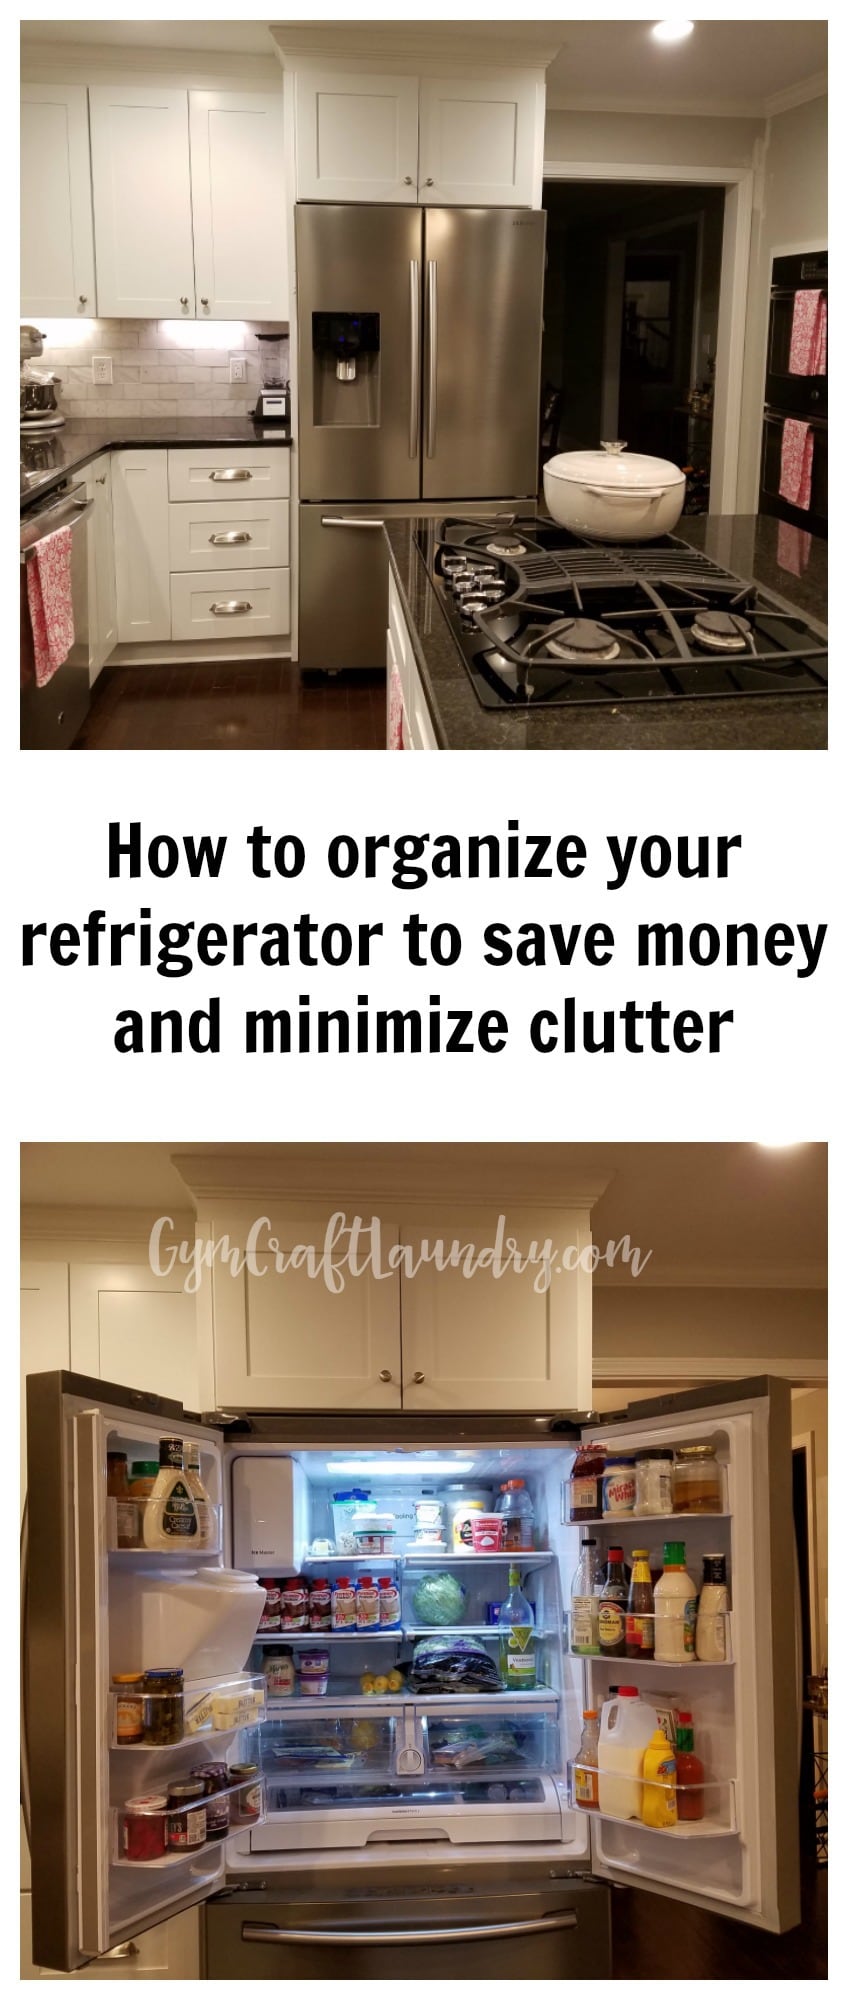 5 Tips for an organized refrigerator from a boss! 